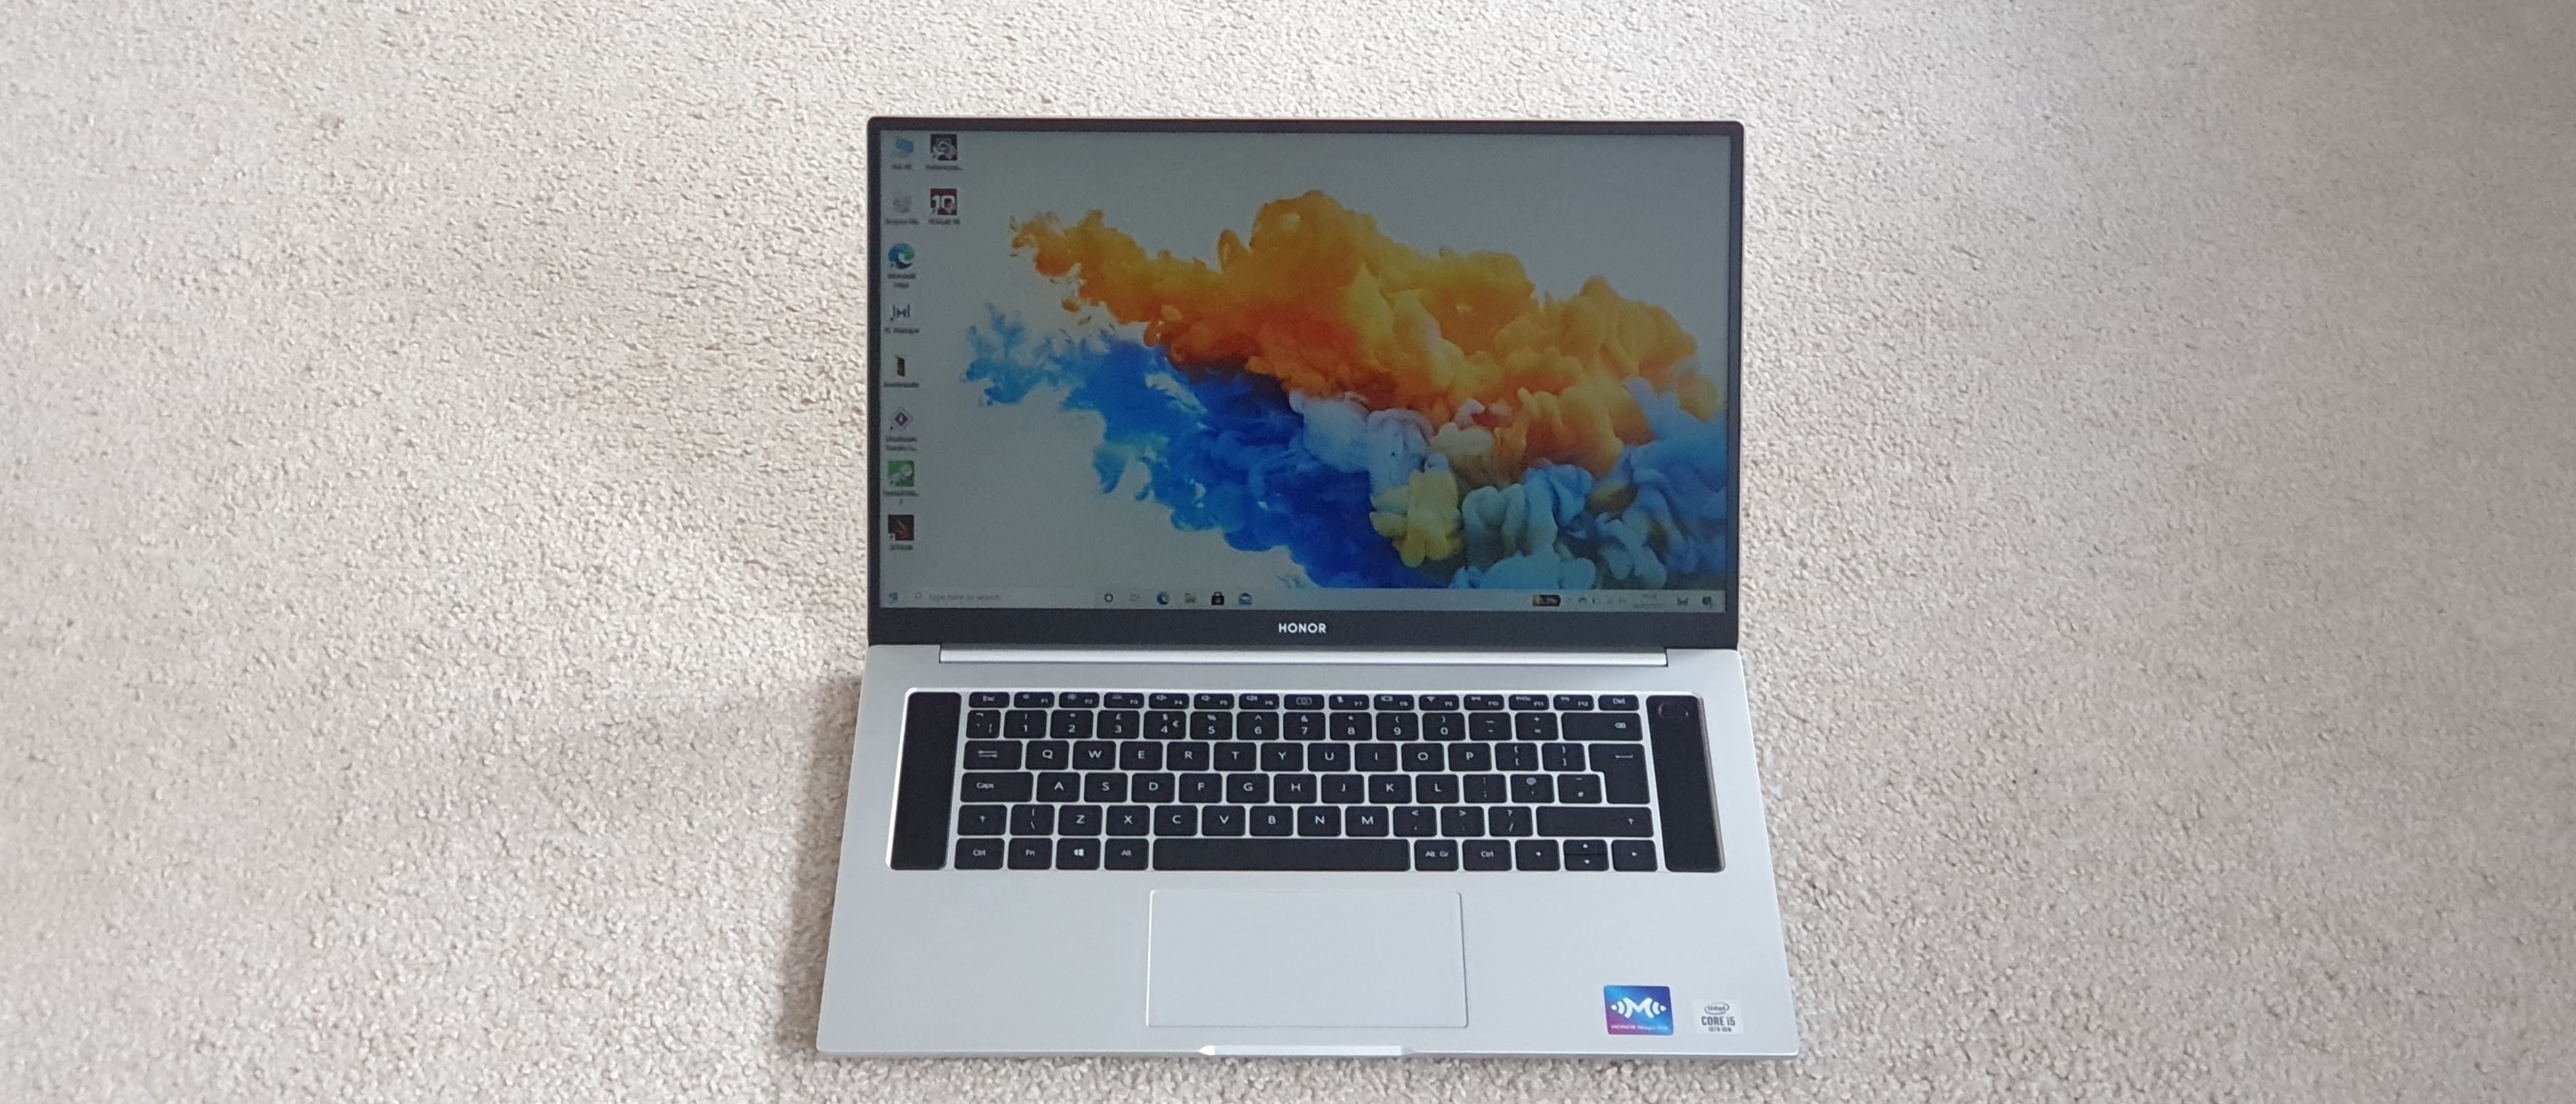 HONOR MagicBook 14 (2021) review: There's a lot to love in this budget PC,  but a few things hold it back from greatness